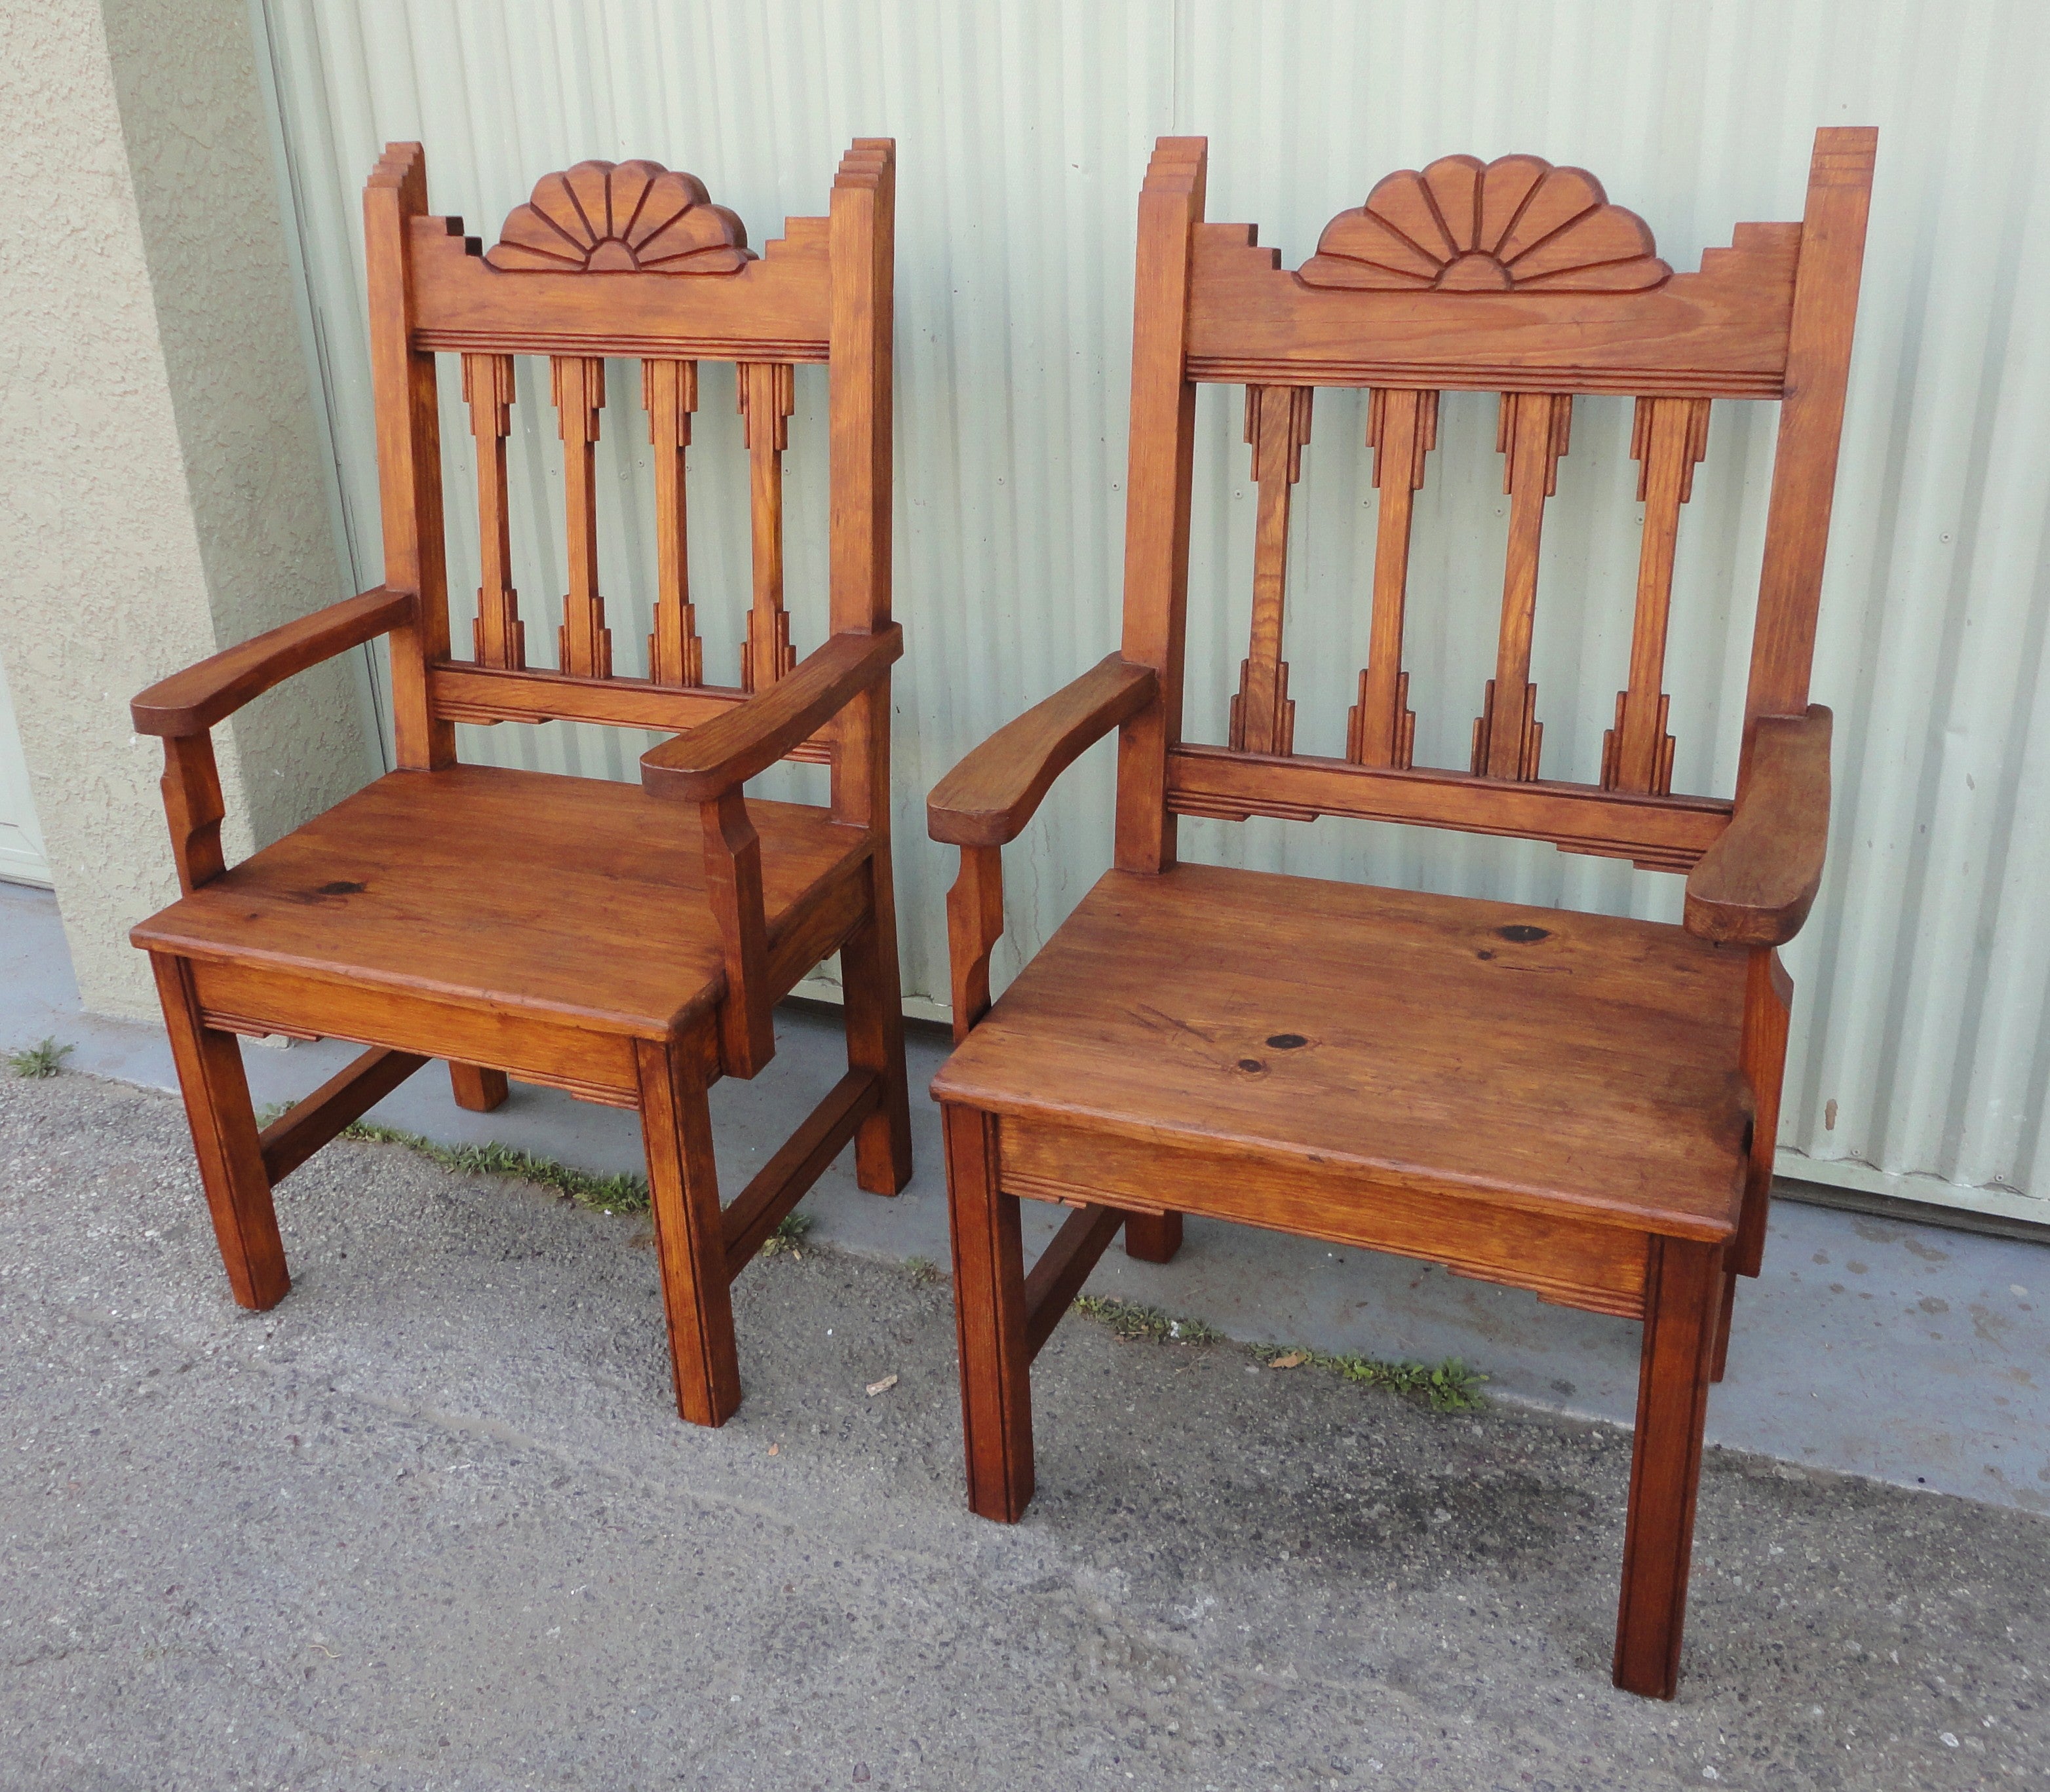 Pair of New Mexico Hand Made Chairs